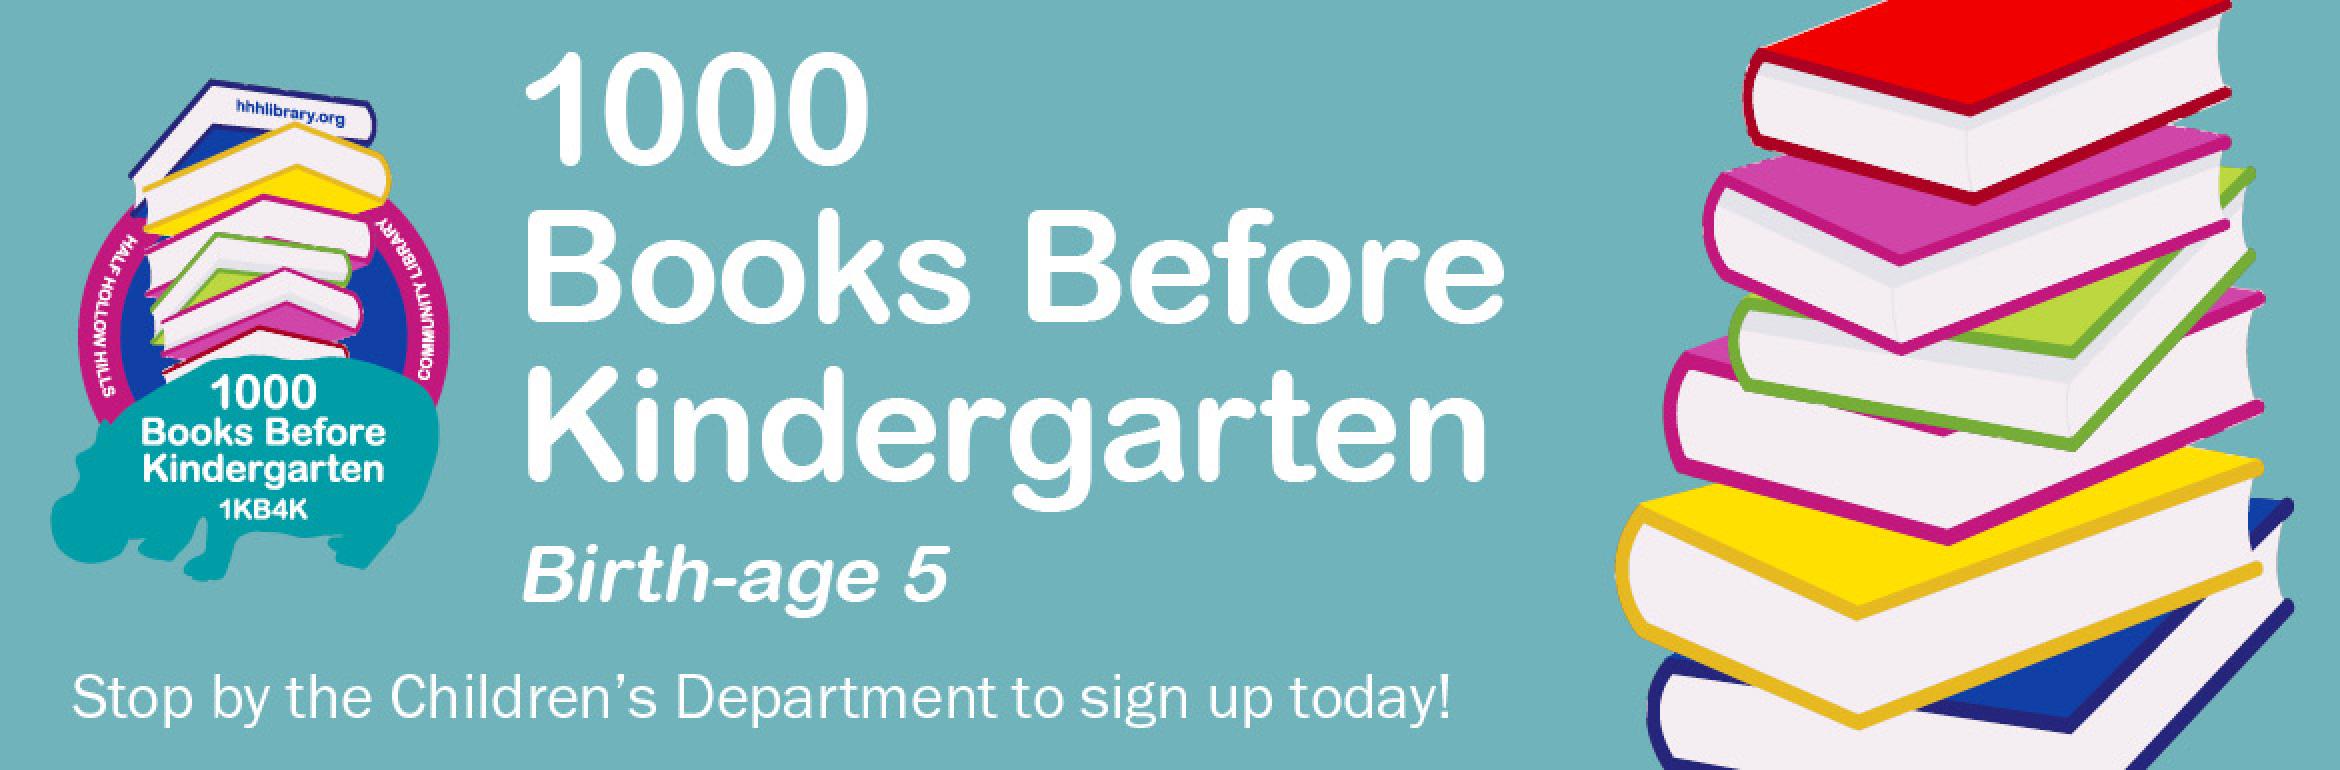 1000 Books Before Kindergarten. Birth-age 5. Stop by the Children’s Department to sign up today!